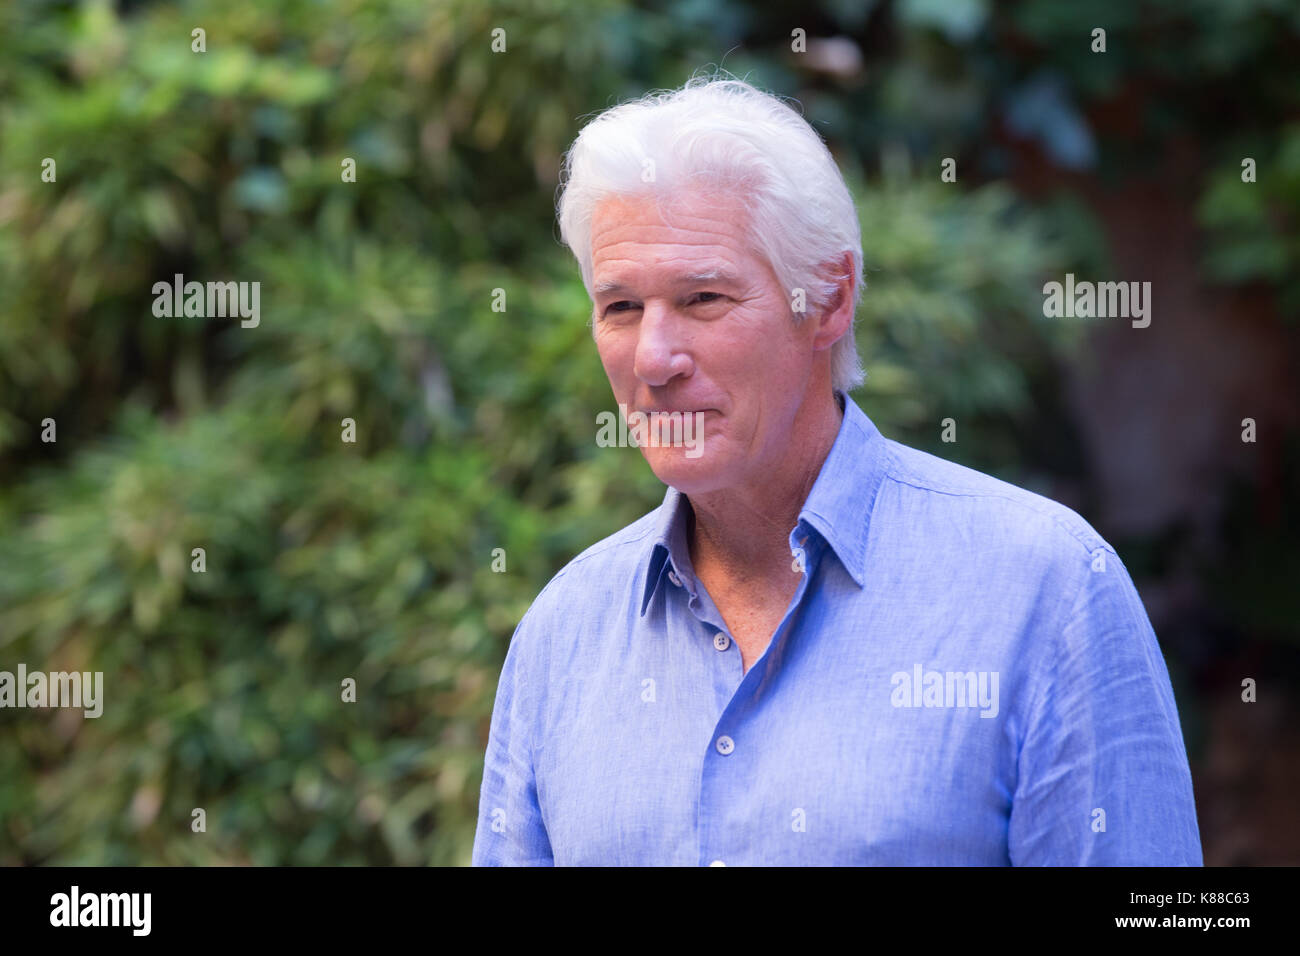 Roma, Italy. 18th Sep, 2017. Photocall with US actor Richard Gere in Rome for his new film "Norman: The Moderate Rise and Tragic Fall of a New York Fixer" (in Italian: "L'incredibile vita di Norman"). Credit: Matteo Nardone/Pacific Press/Alamy Live News Stock Photo